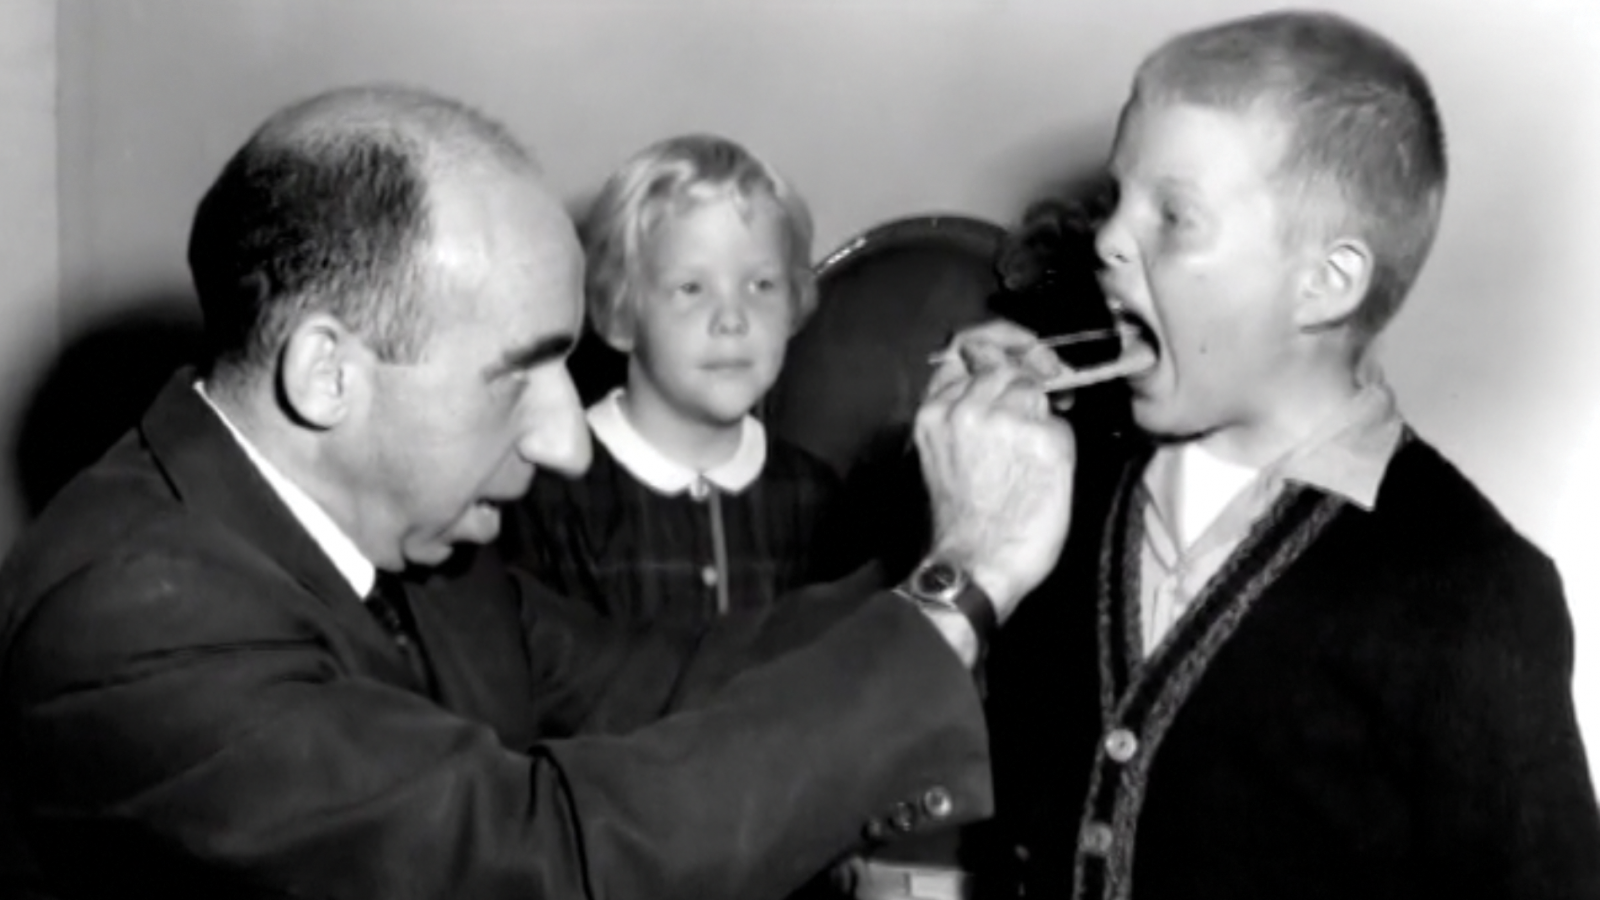 Dr. Stamler examining the throat of a young boy while a young girl watches.